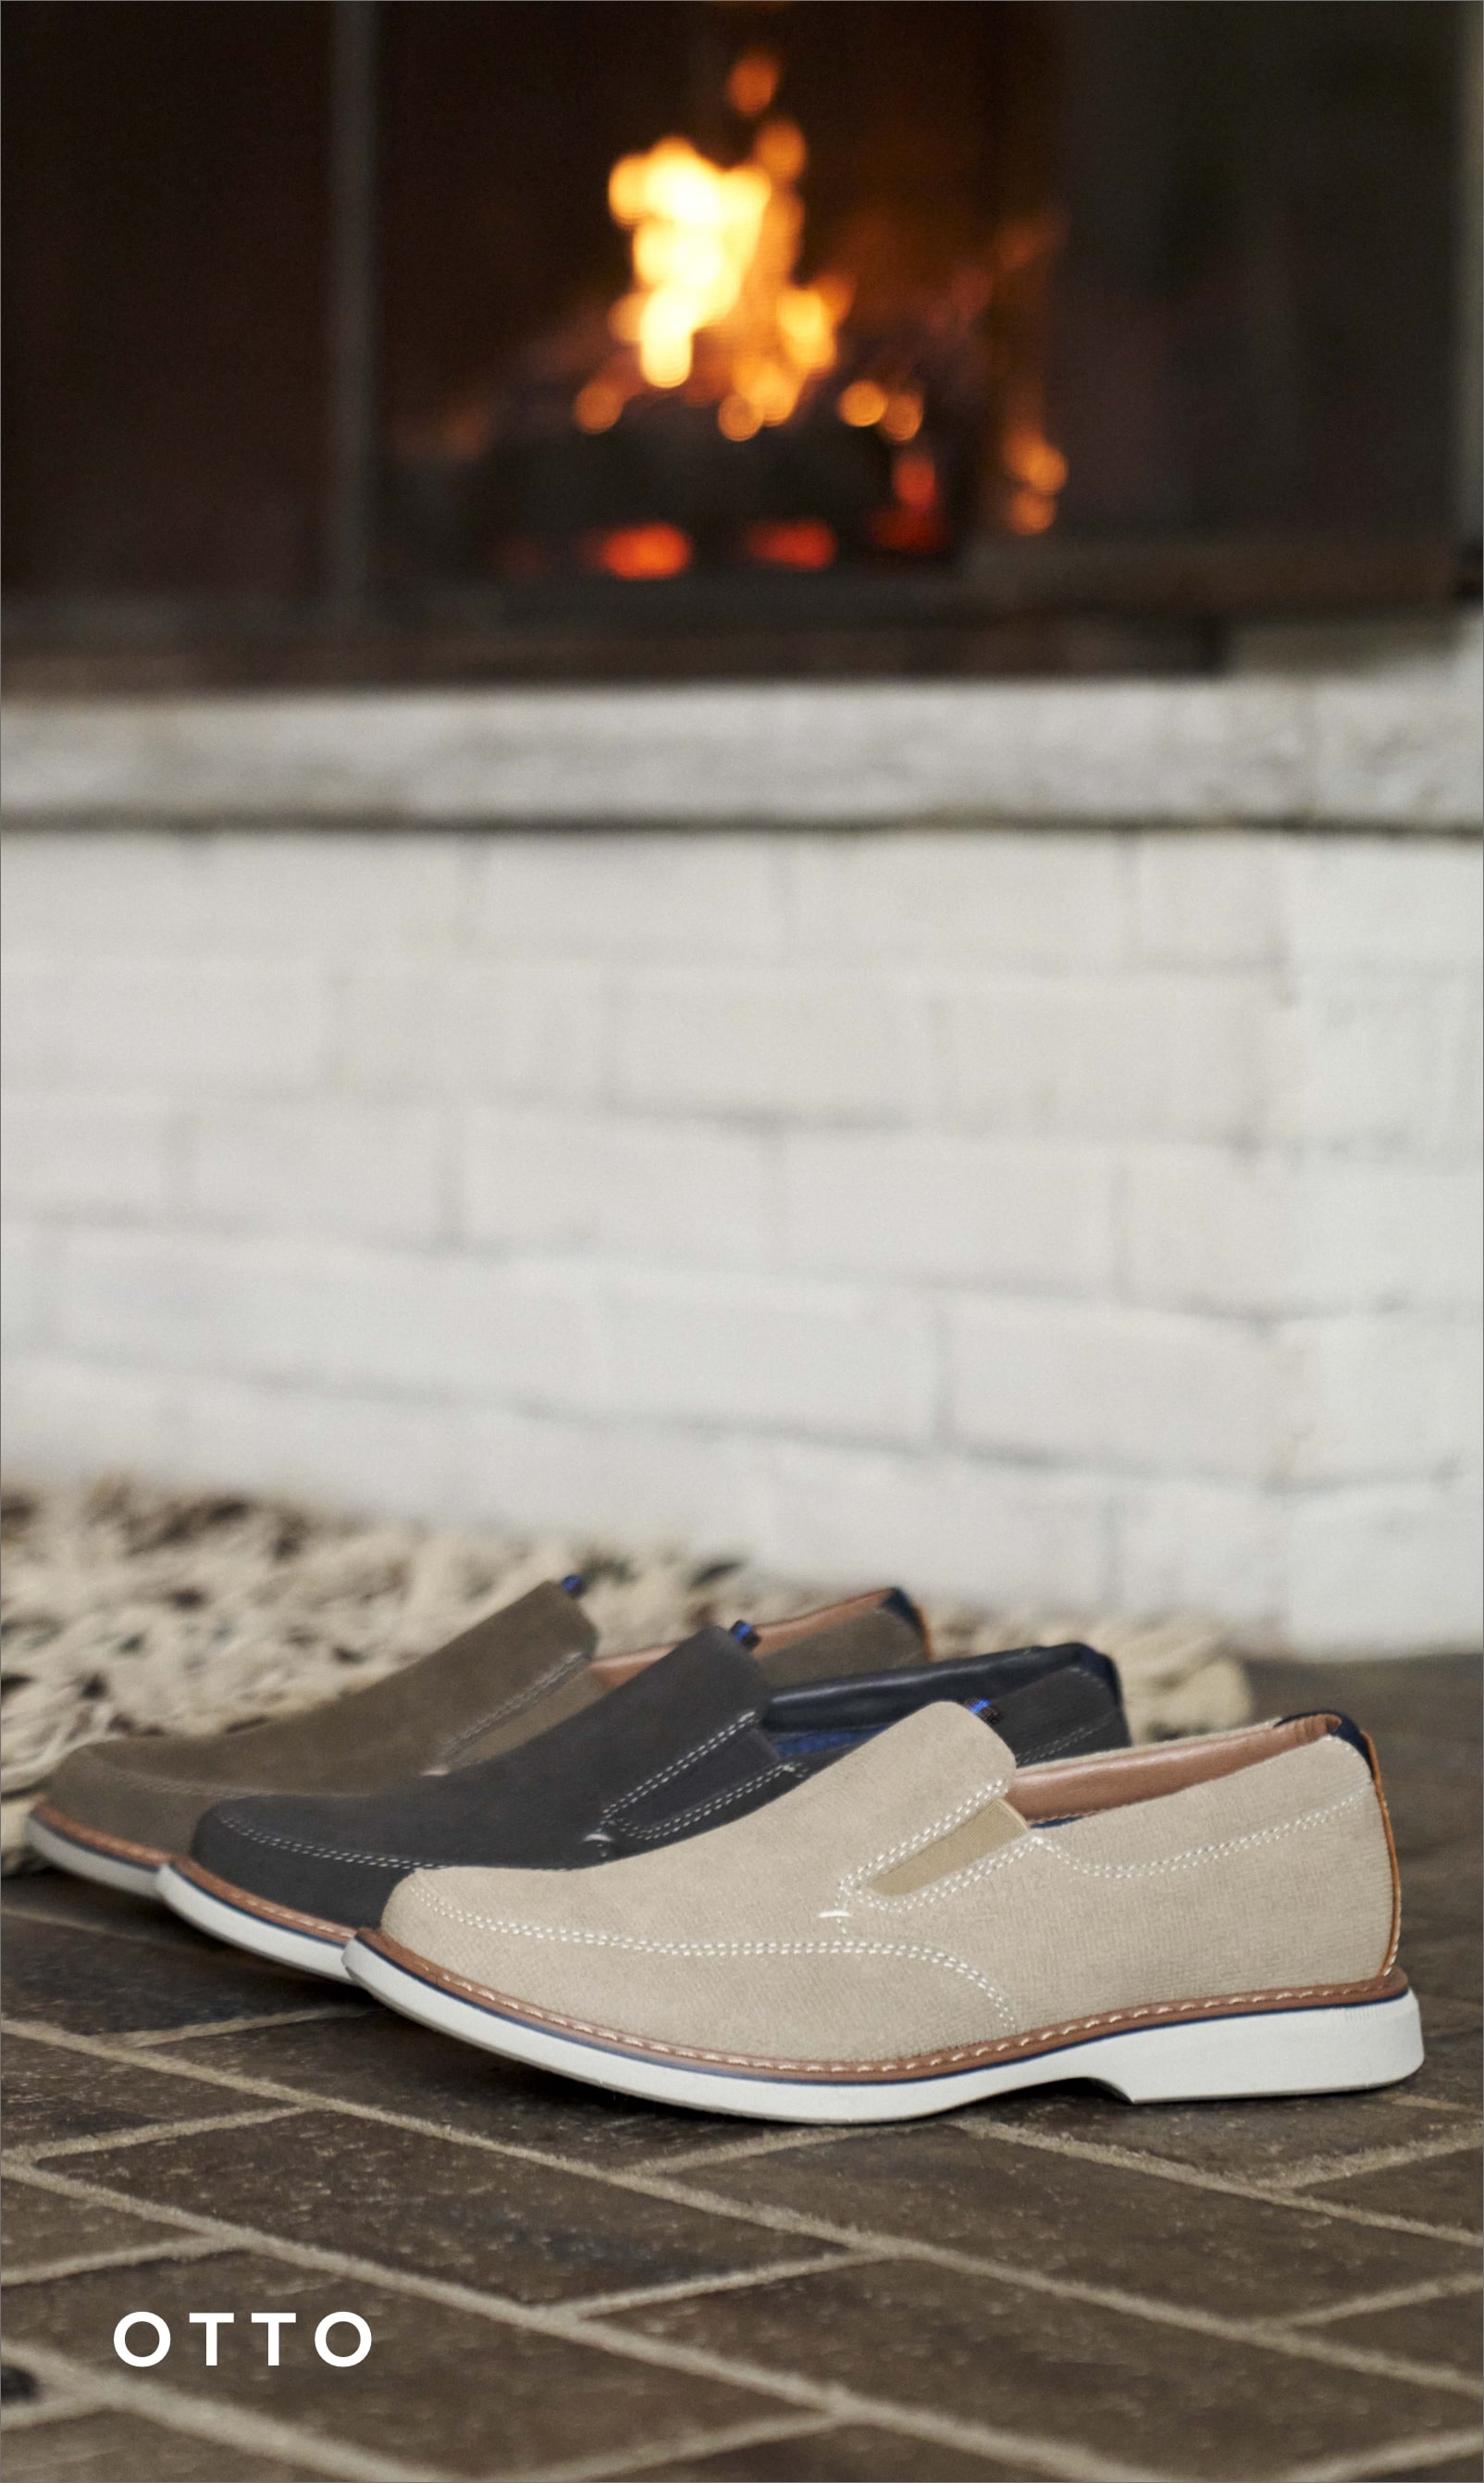 Men's Casual Shoes category. Image features the Otto Slip On in a variety of colors. 